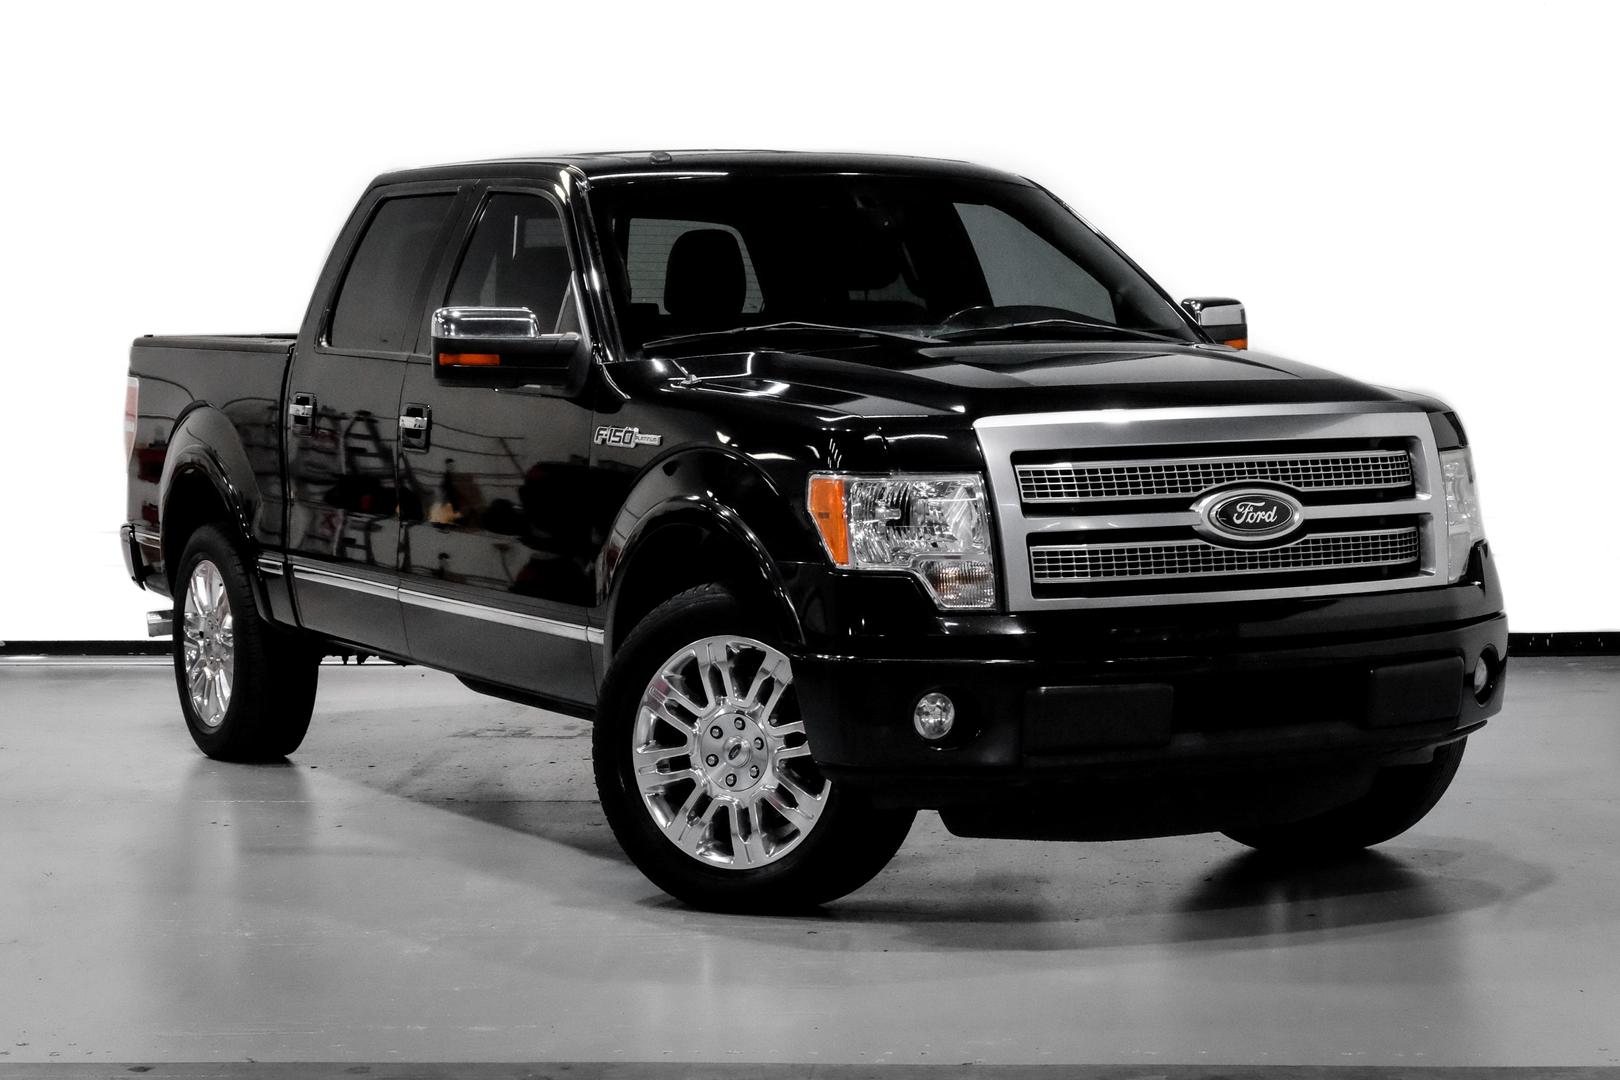 USED FORD F150 SUPERCREW CAB 2011 for sale in Dallas, TX | Driven